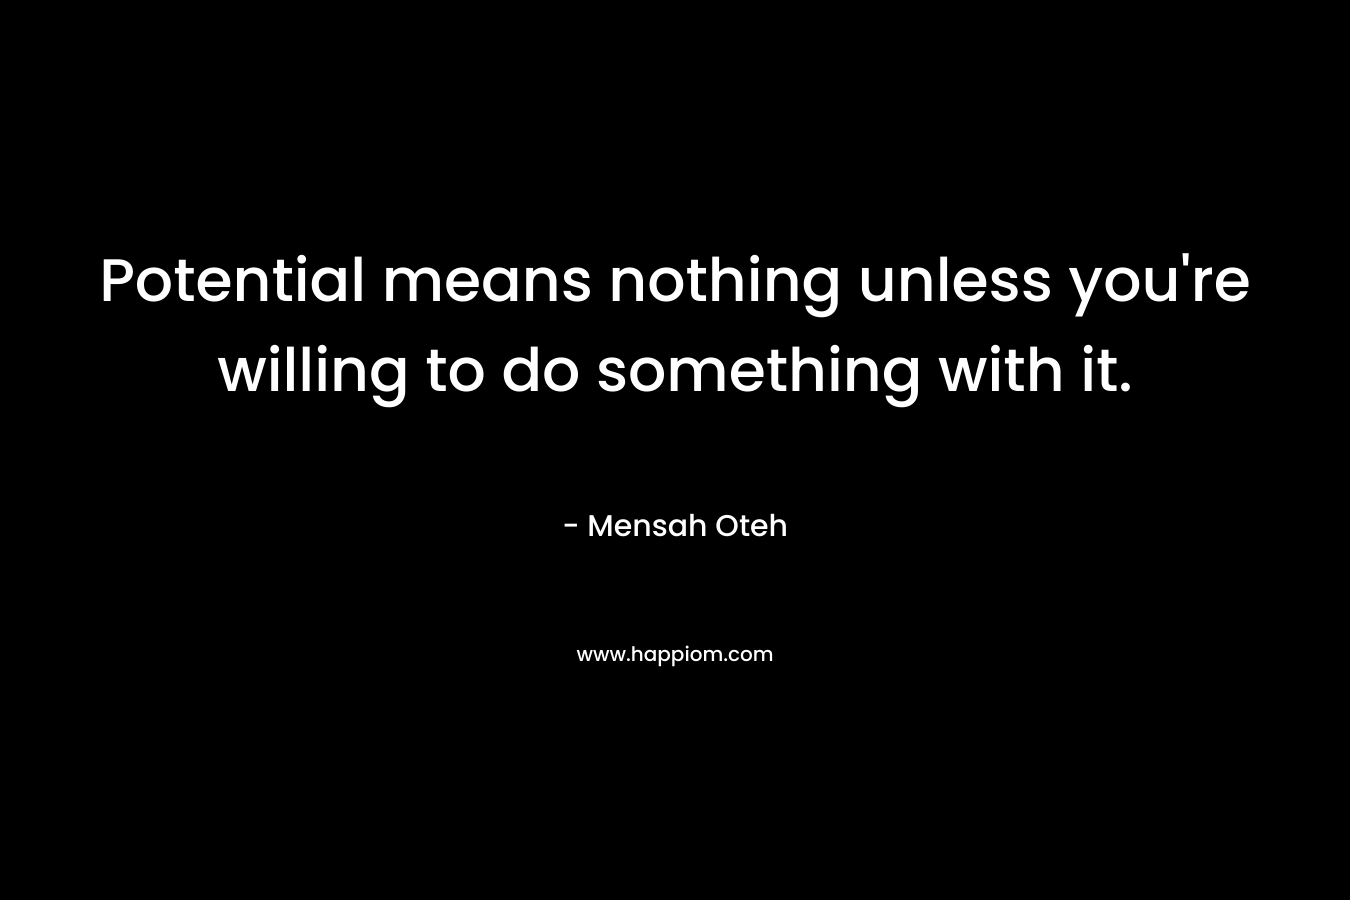 Potential means nothing unless you're willing to do something with it.